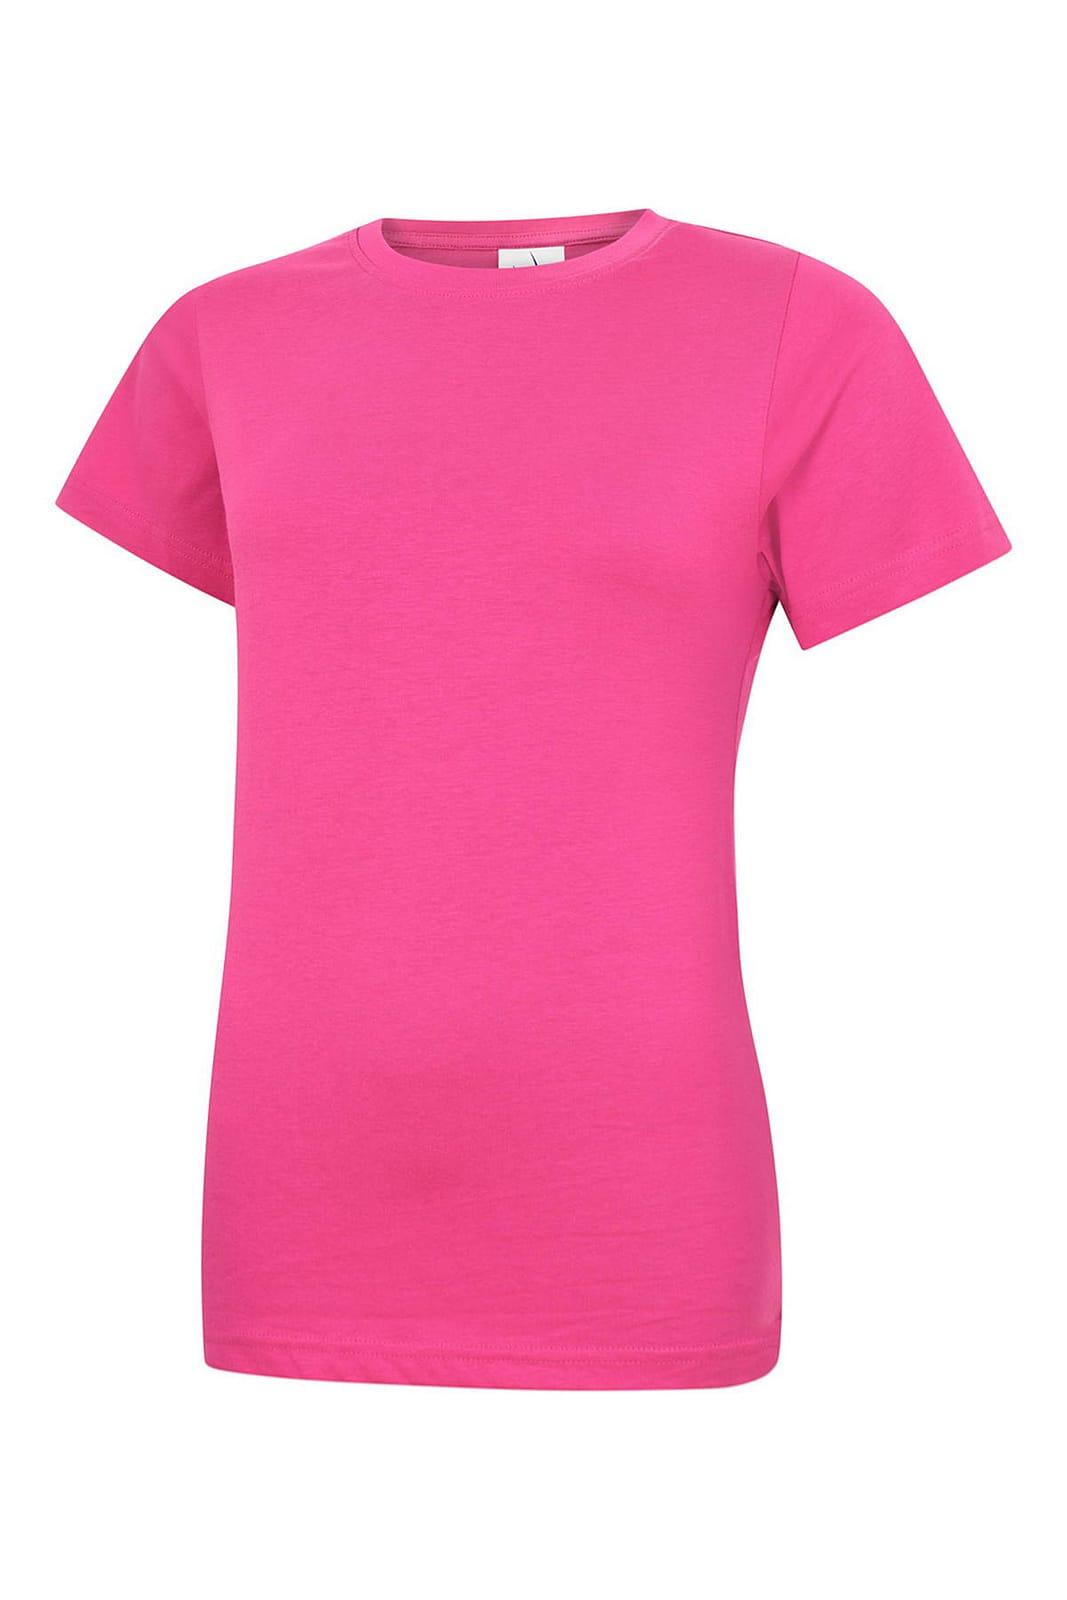 Uneek Womens Classic Crew Neck T-Shirt in Hot Pink (Product Code: UC318)